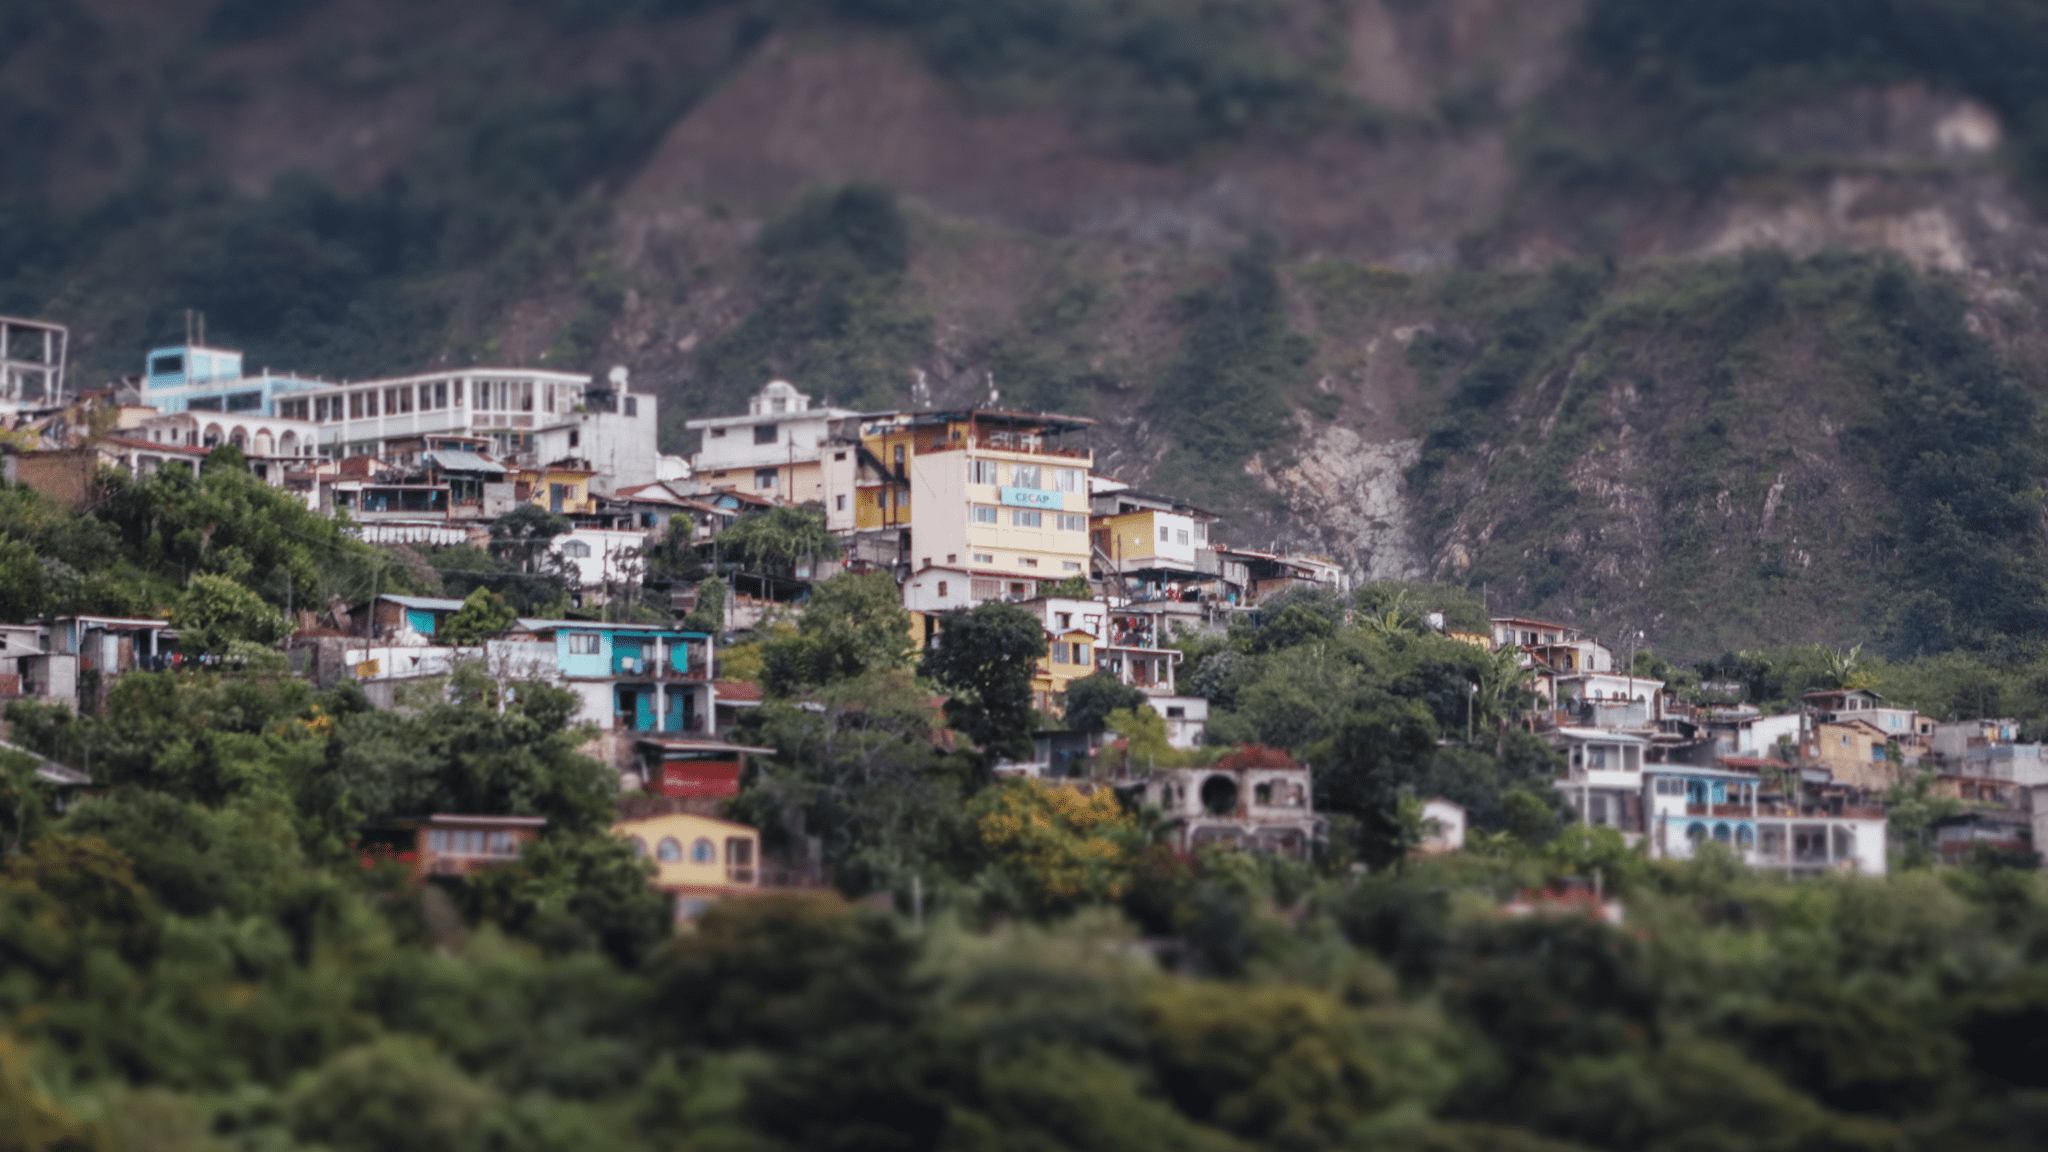 The village is nestled between two mountains on each side.